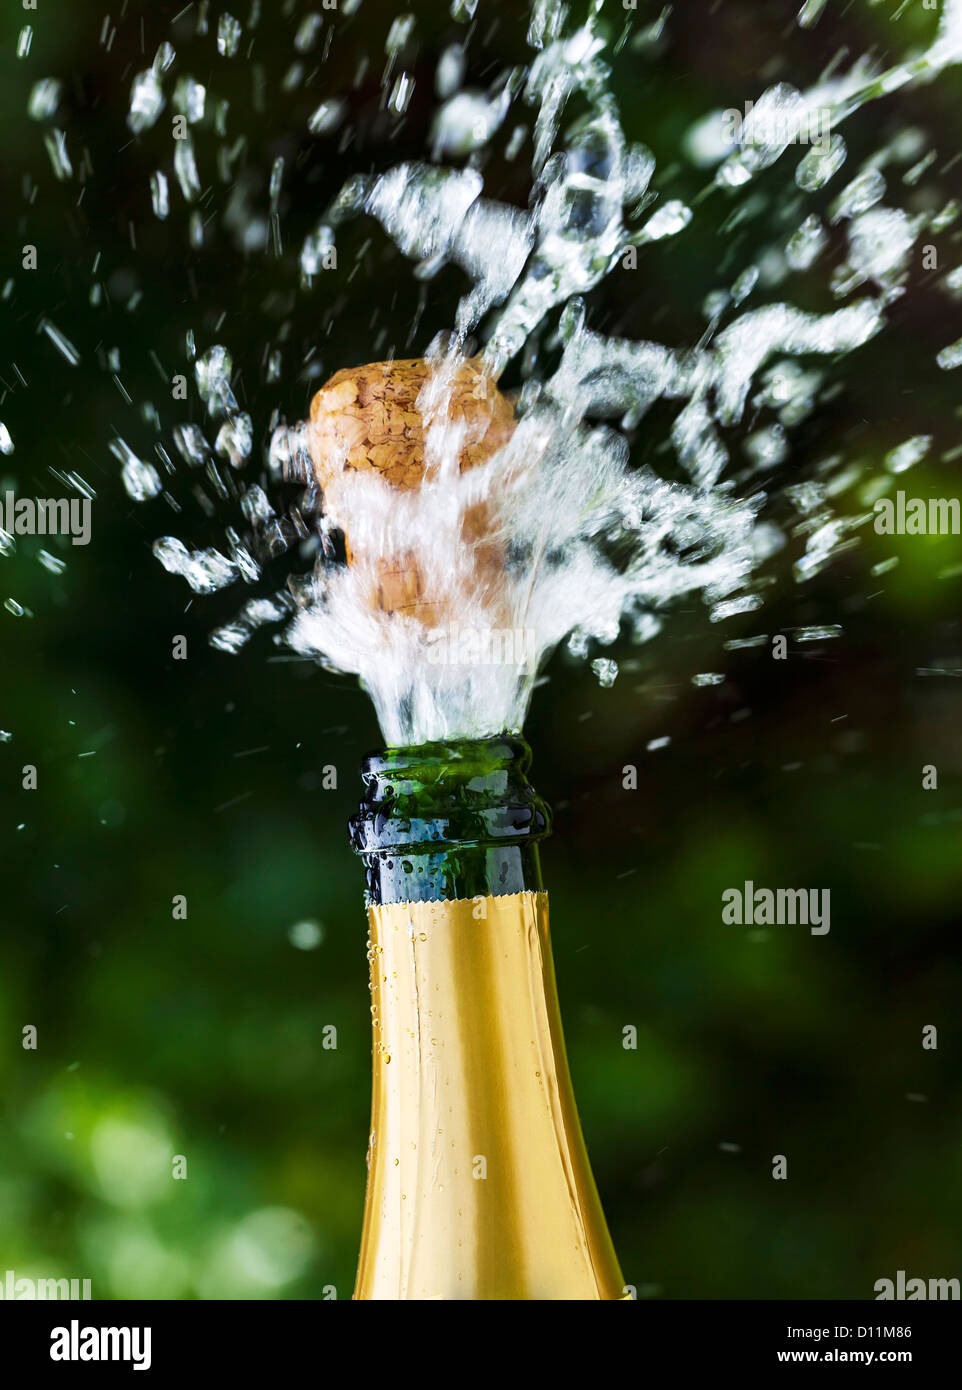 Opened champagne bottle with flying cork Stock Photo